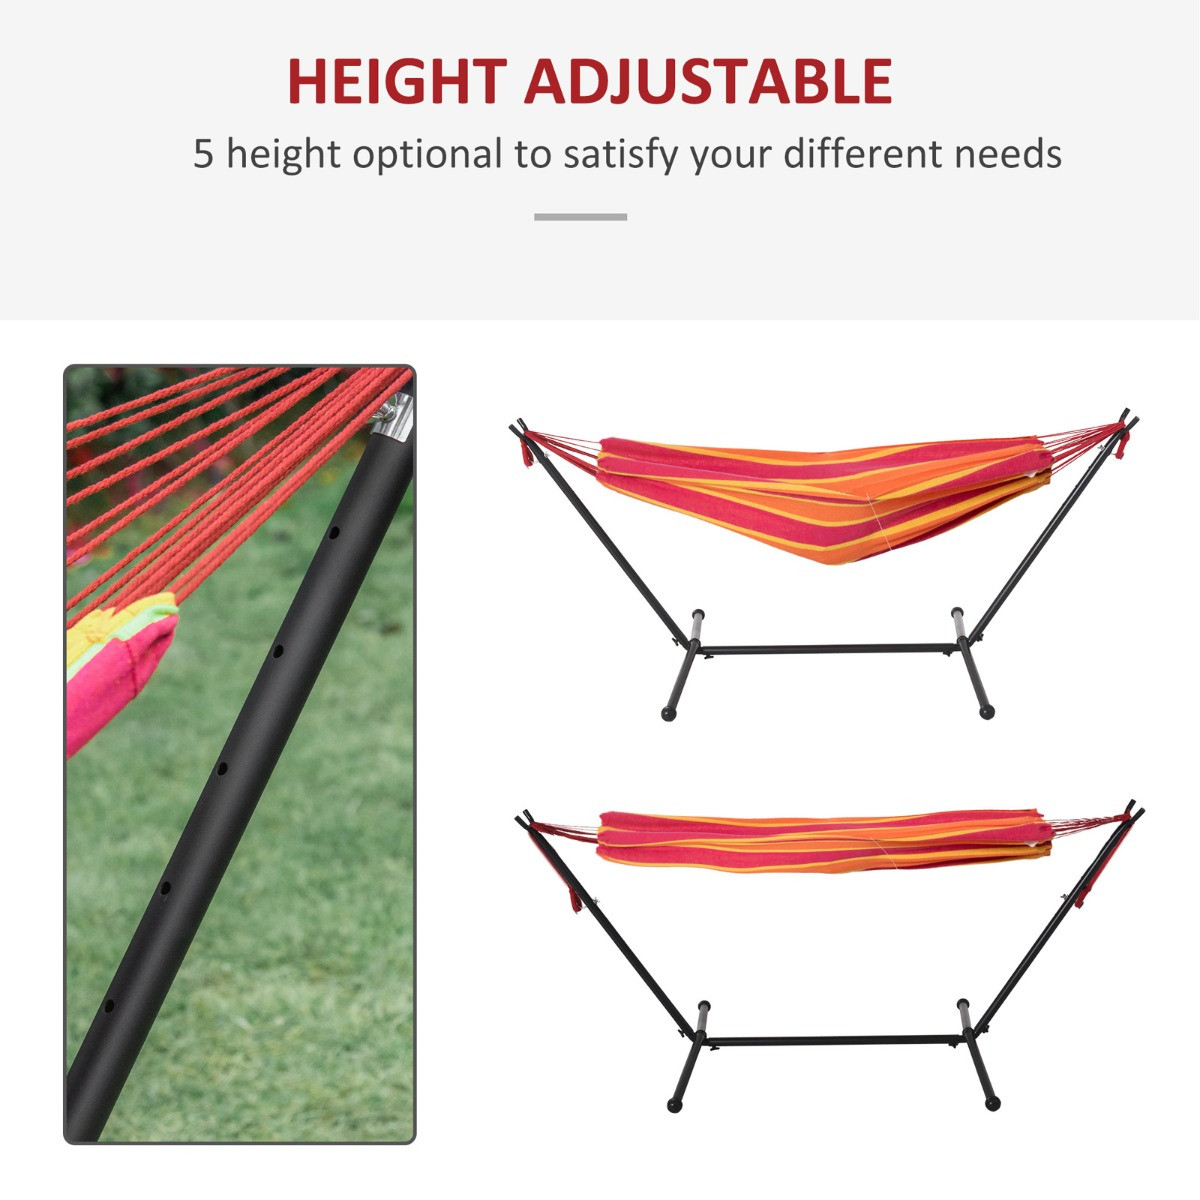 Outsunny Hammock With Stand, Red - 294 x 117 cm>